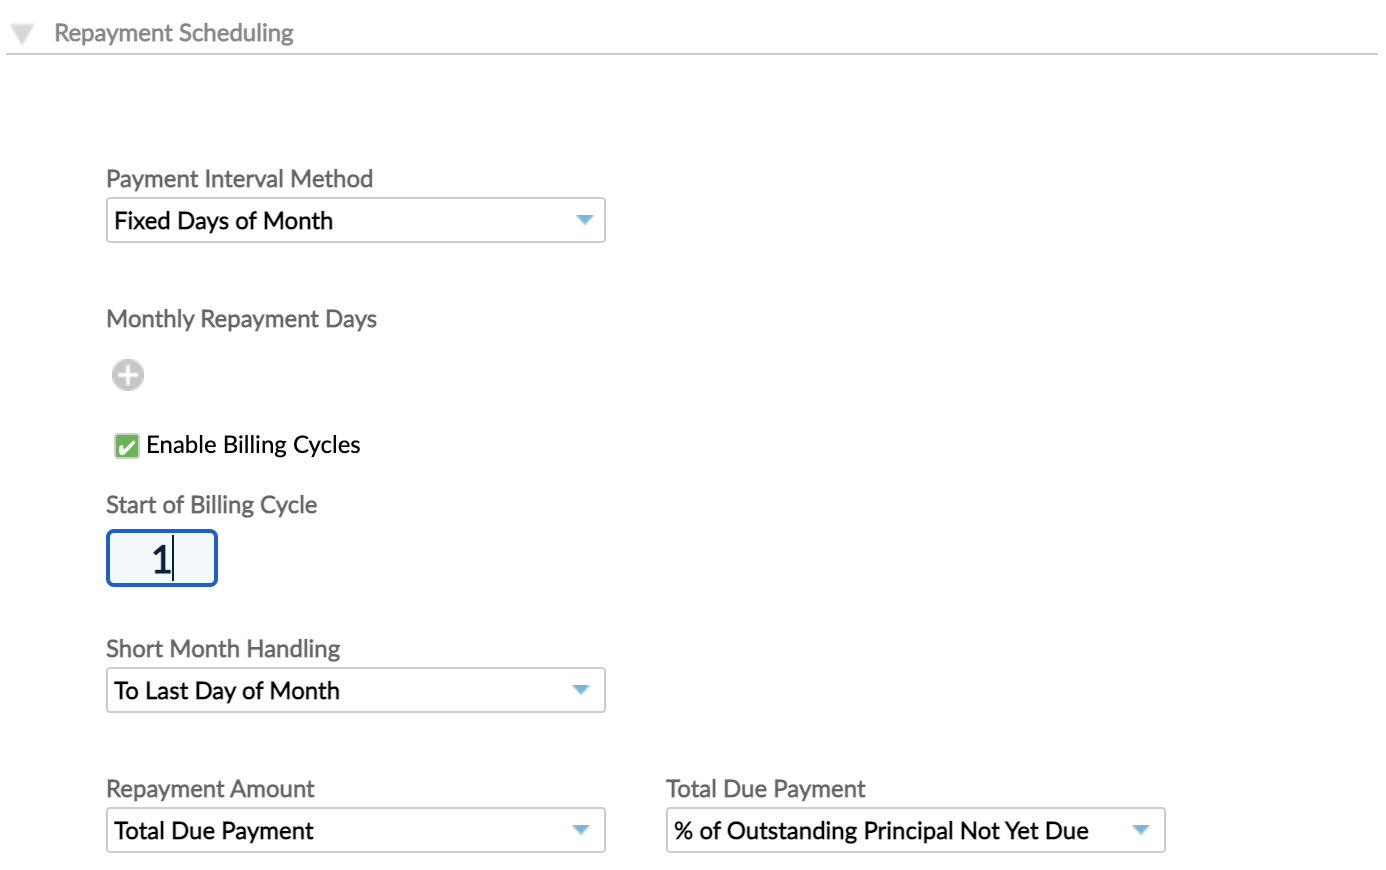 One of the options you must select under Repayment Scheduling to enable Billing cycles